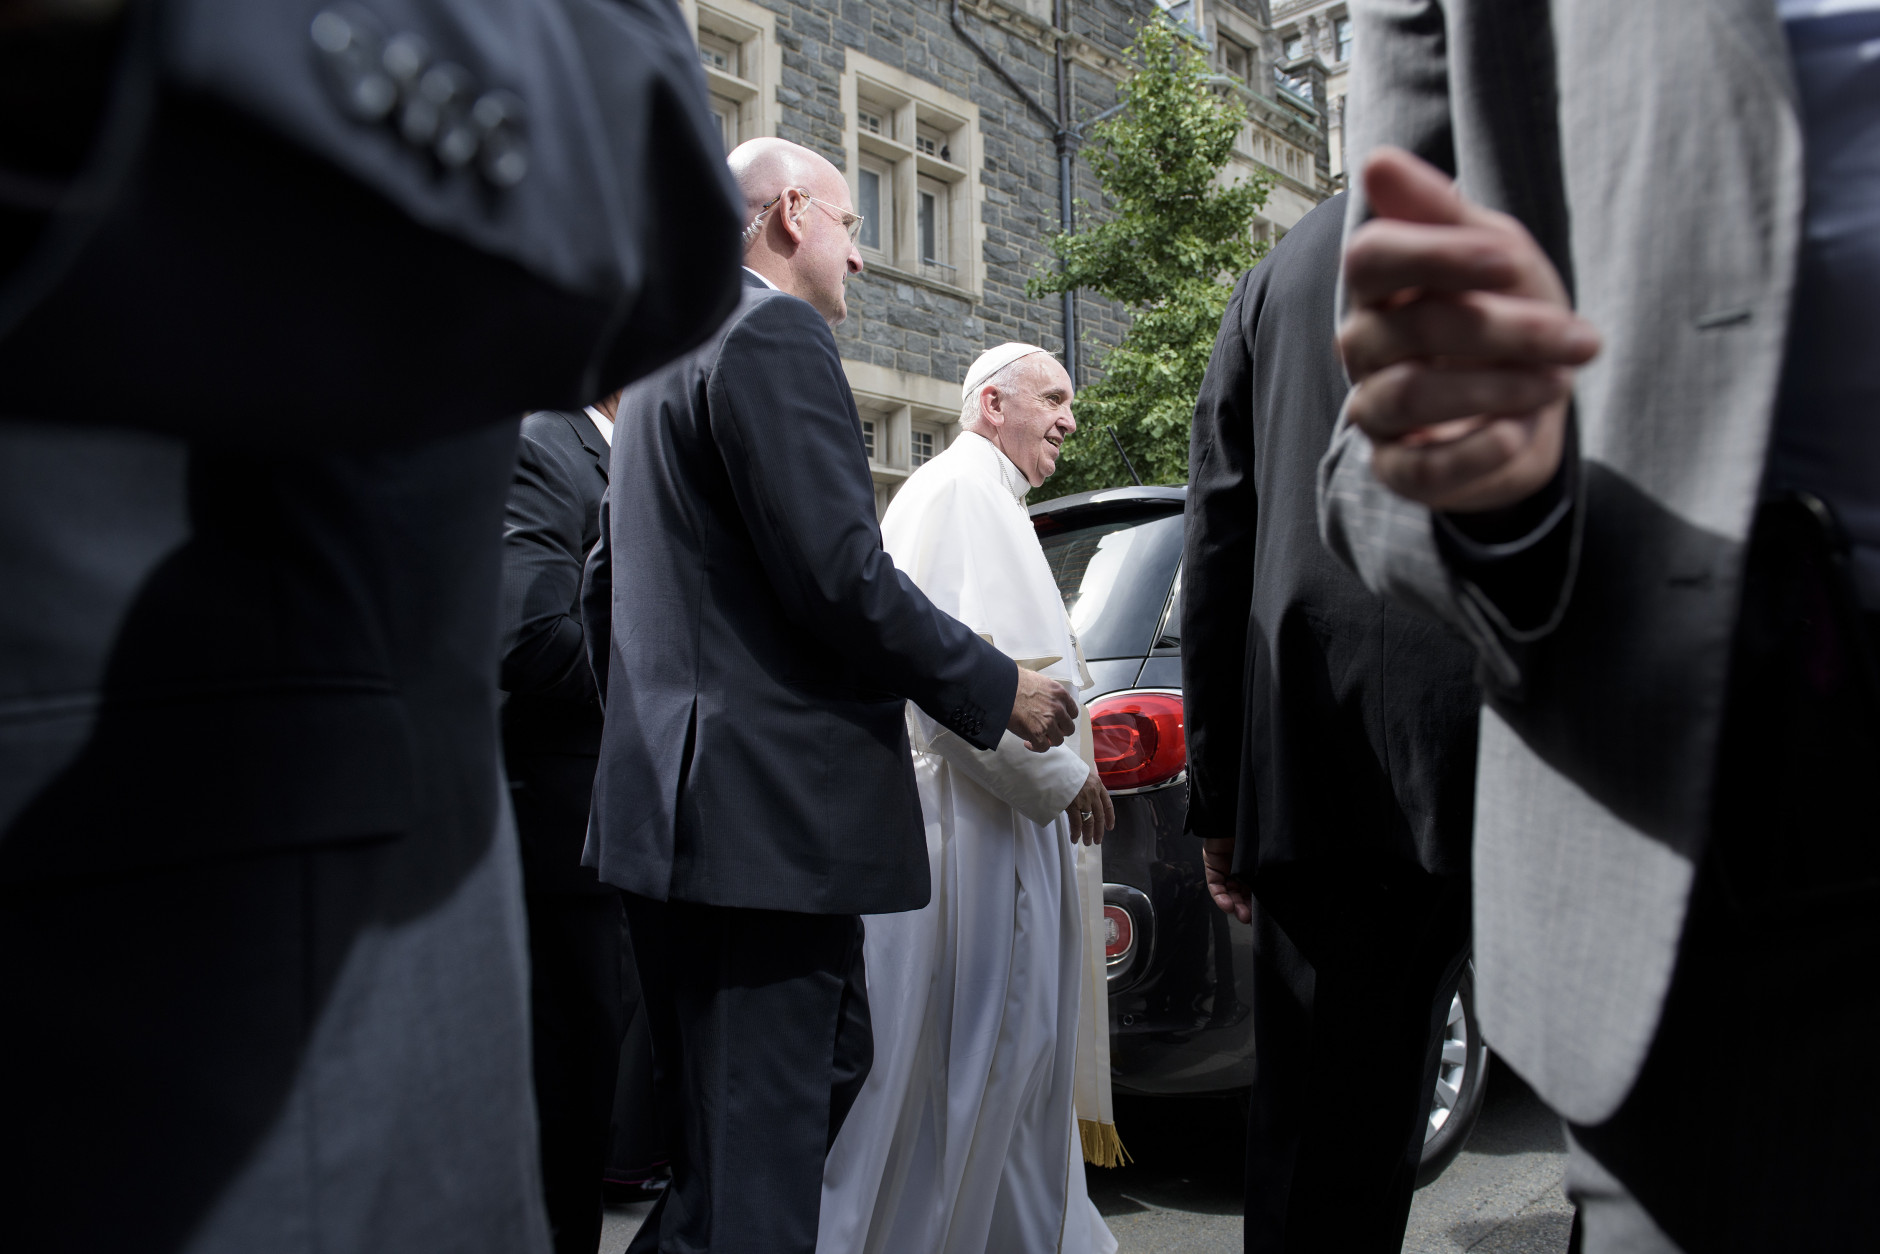 WASHINGTON, DC - SEPTEMBER 24: Pope Francis leaves the Catholic Charities after blessing a lunch for charity workers and the needy September 24, 2015 in Washington, DC. Pope Francis is in the United States for six days during his first trip as the leader of the Catholic Church. (Photo by Brendan Smialowski-Pool/Getty Images)